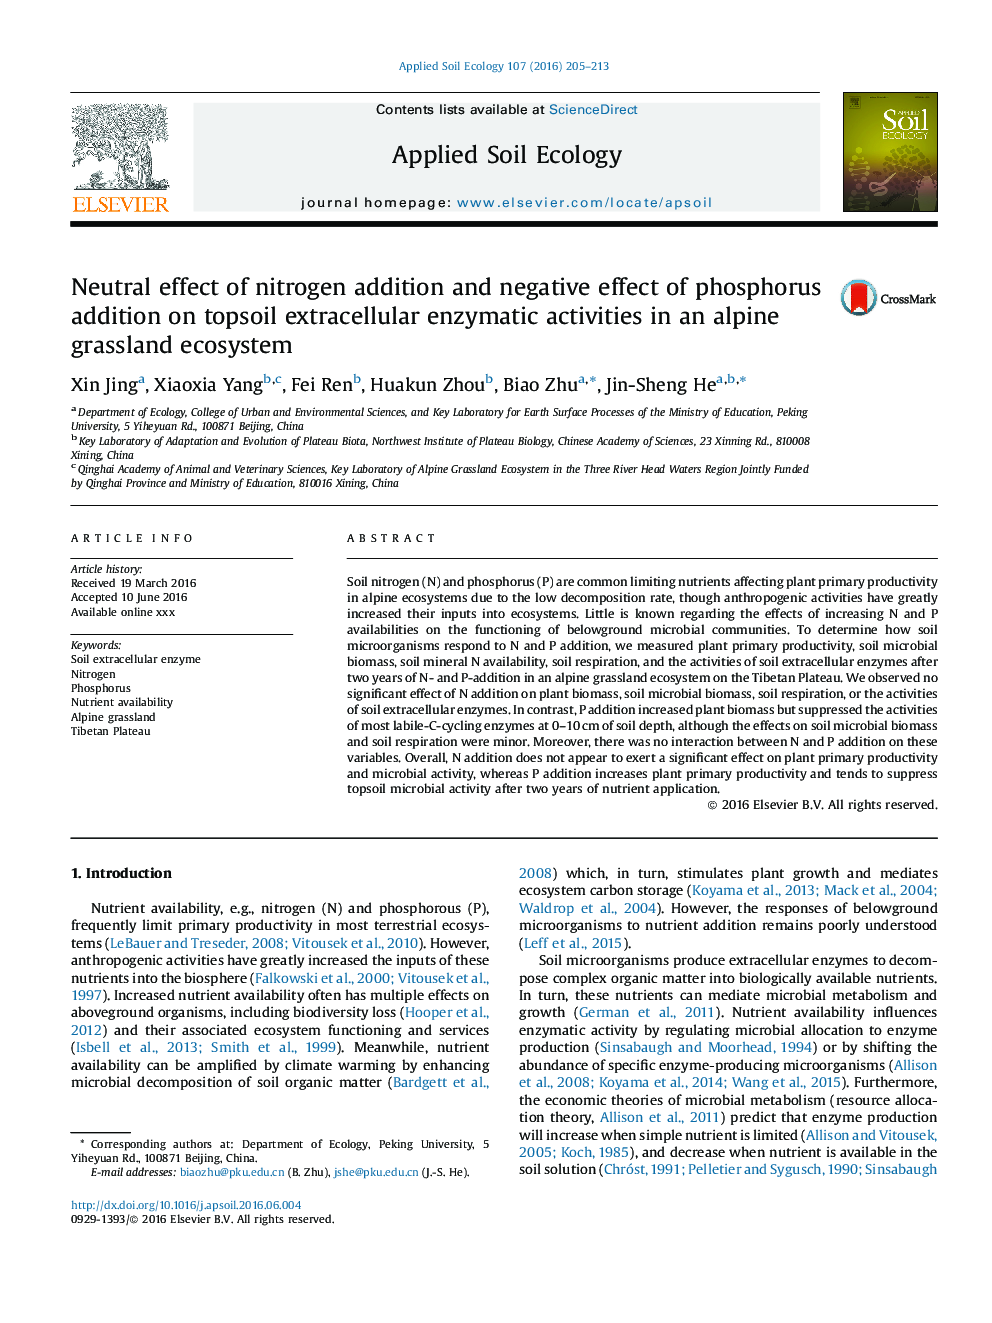 Neutral effect of nitrogen addition and negative effect of phosphorus addition on topsoil extracellular enzymatic activities in an alpine grassland ecosystem